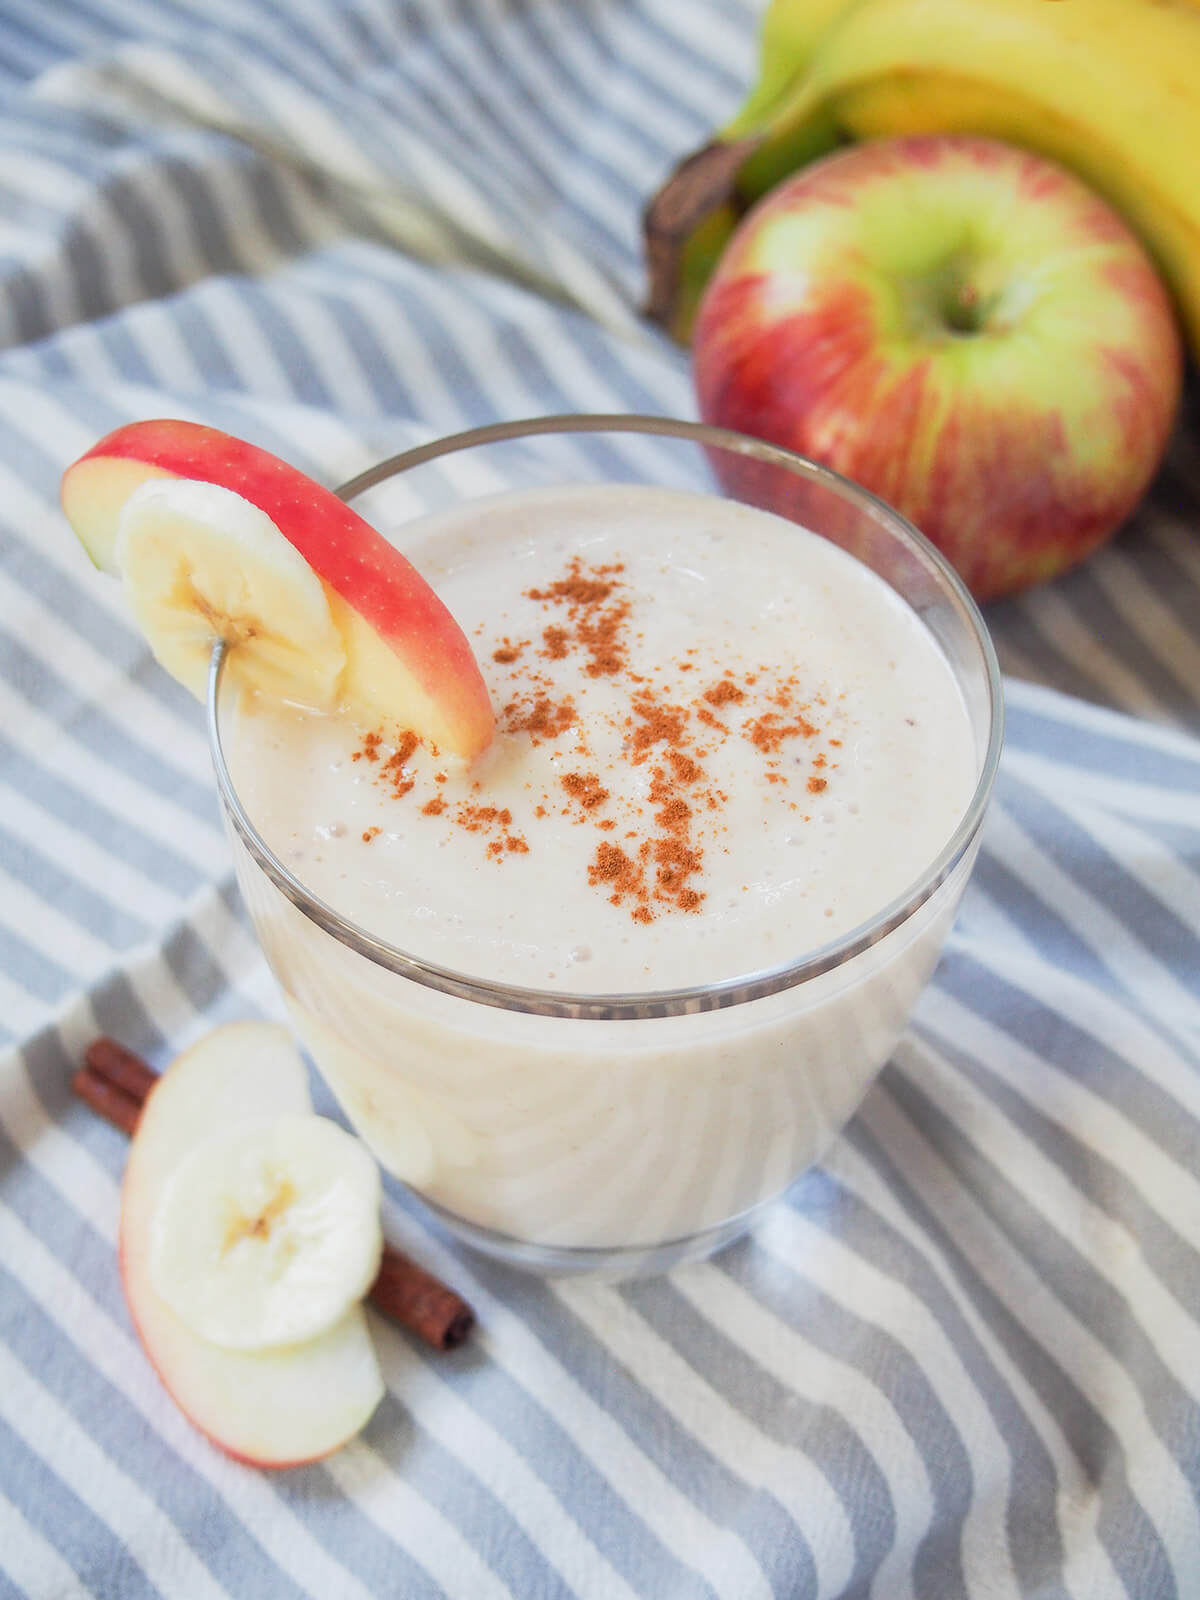 https://www.carolinescooking.com/wp-content/uploads/2023/10/apple-banana-smoothie-picture.jpg